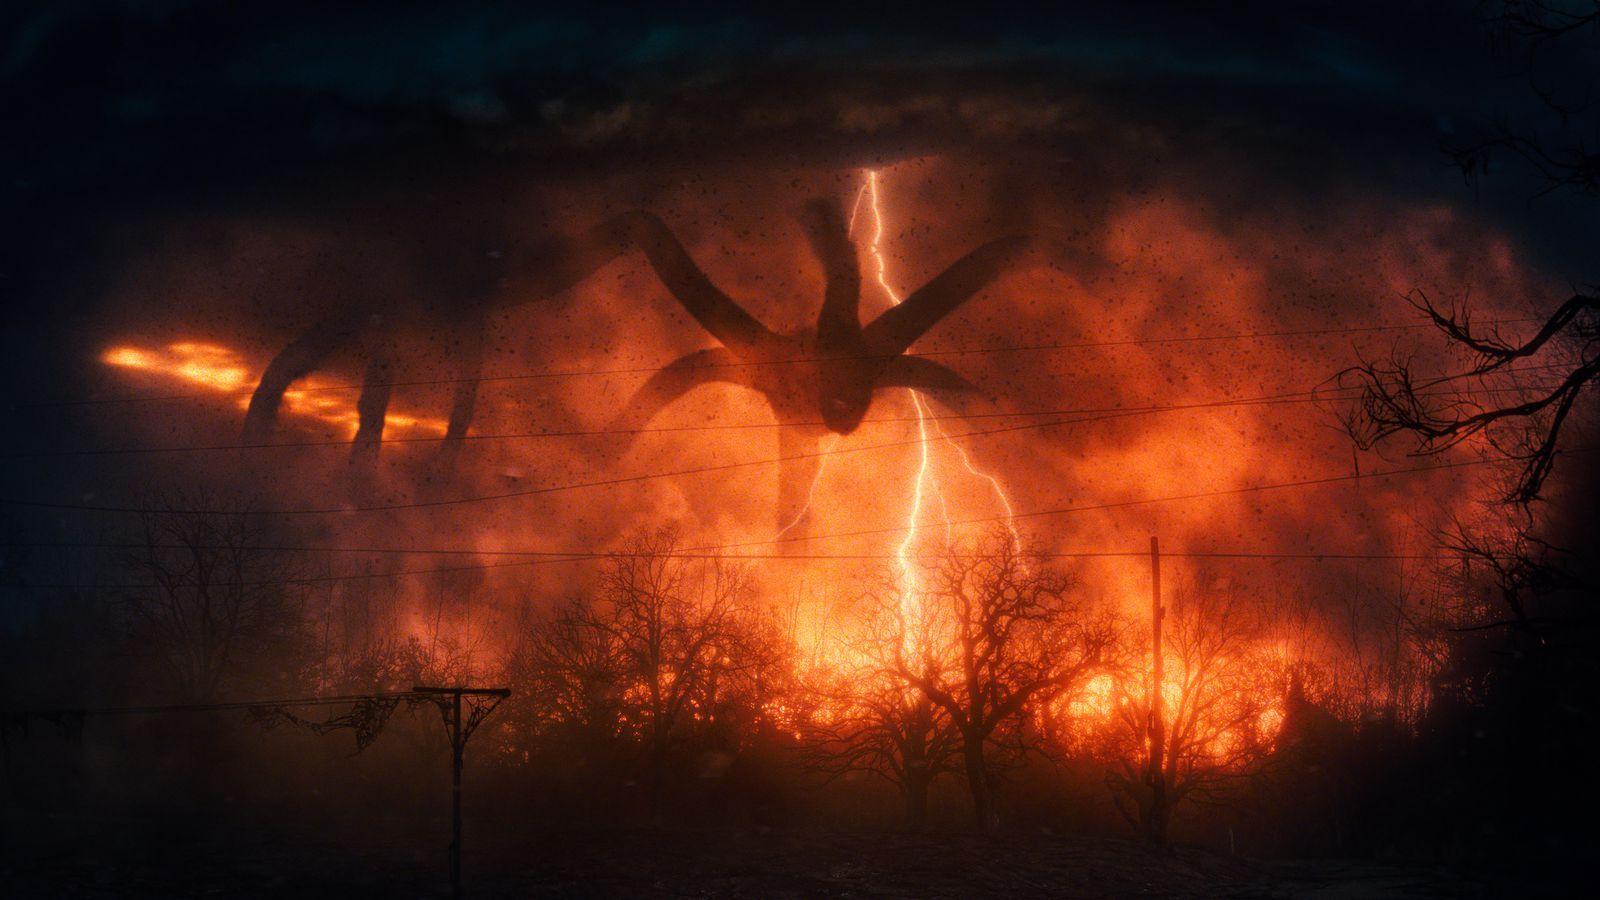 Stranger Things season 3: How and when to watch and plot rumors